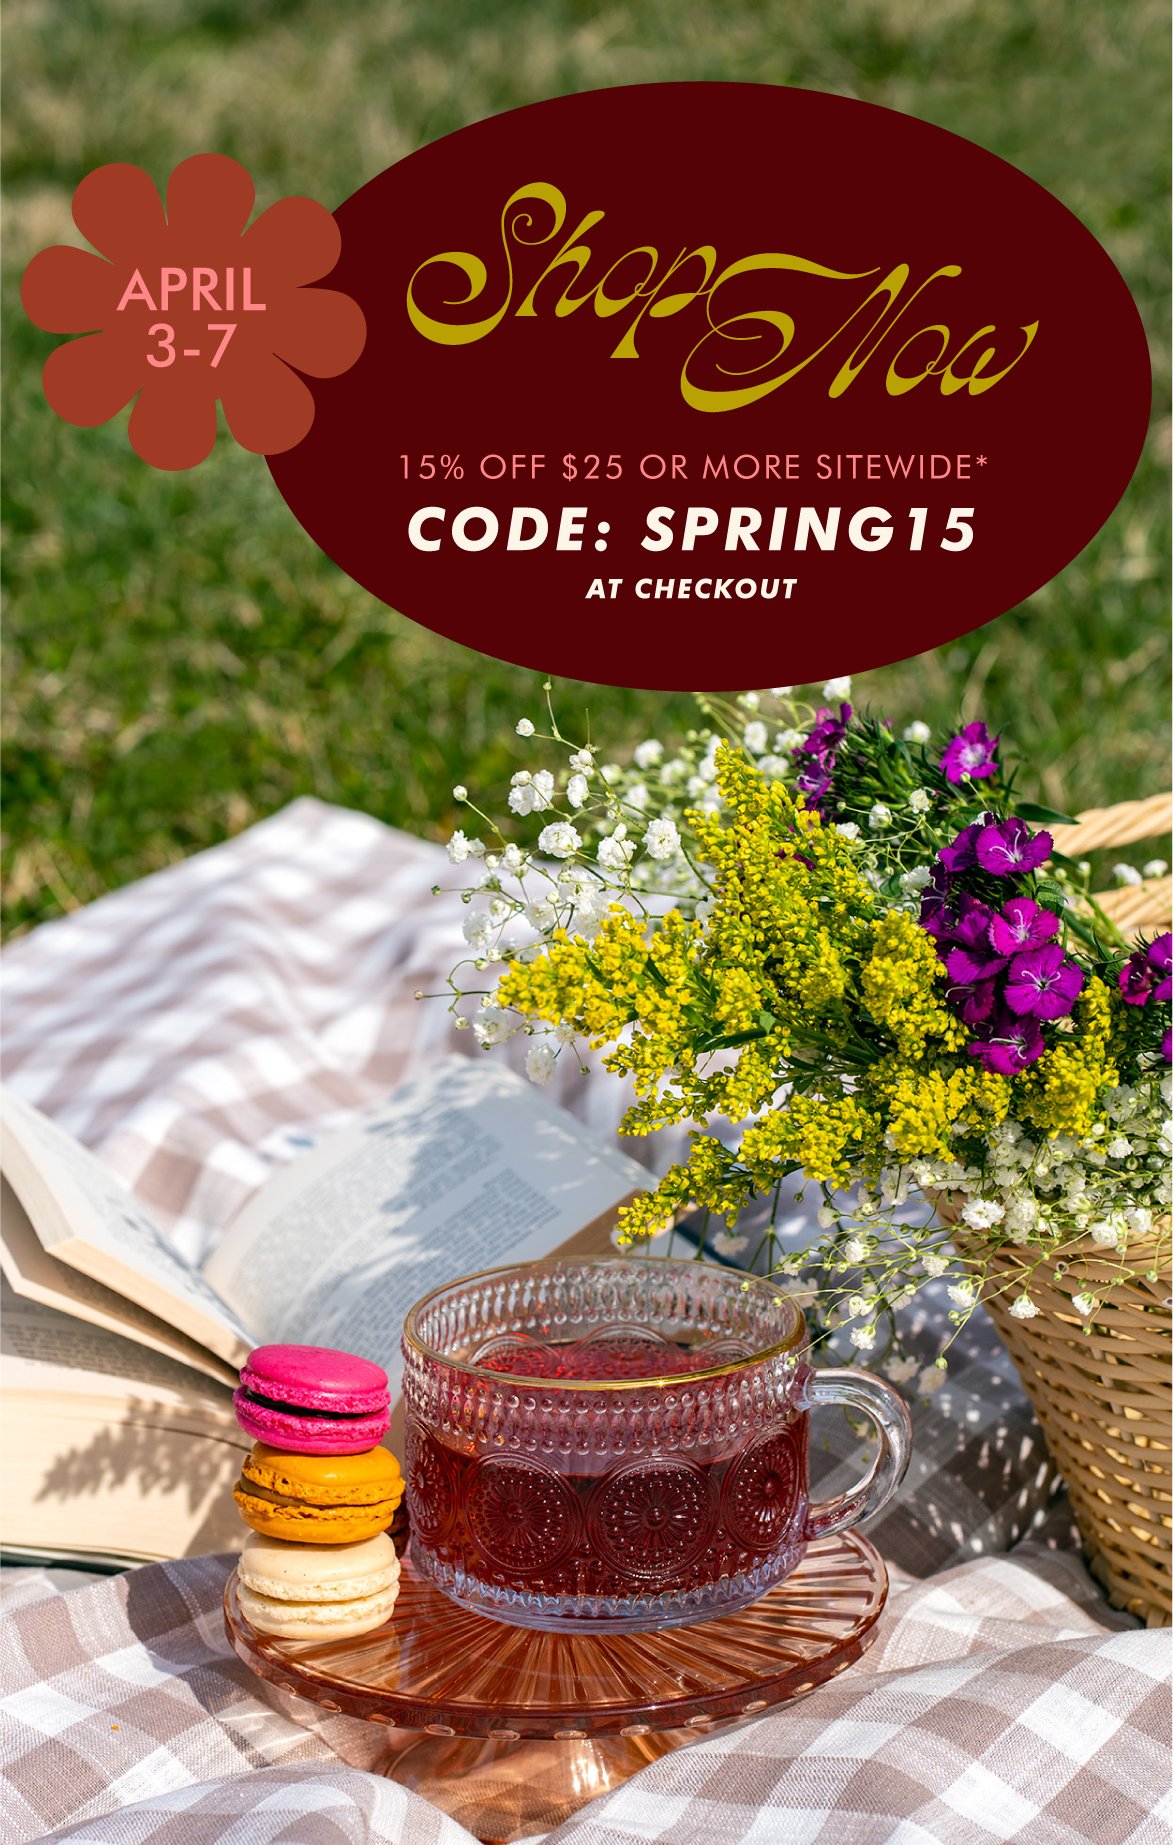 April 3-7, shop 15% off $25 or more sitewide with code SPRING15 at checkout